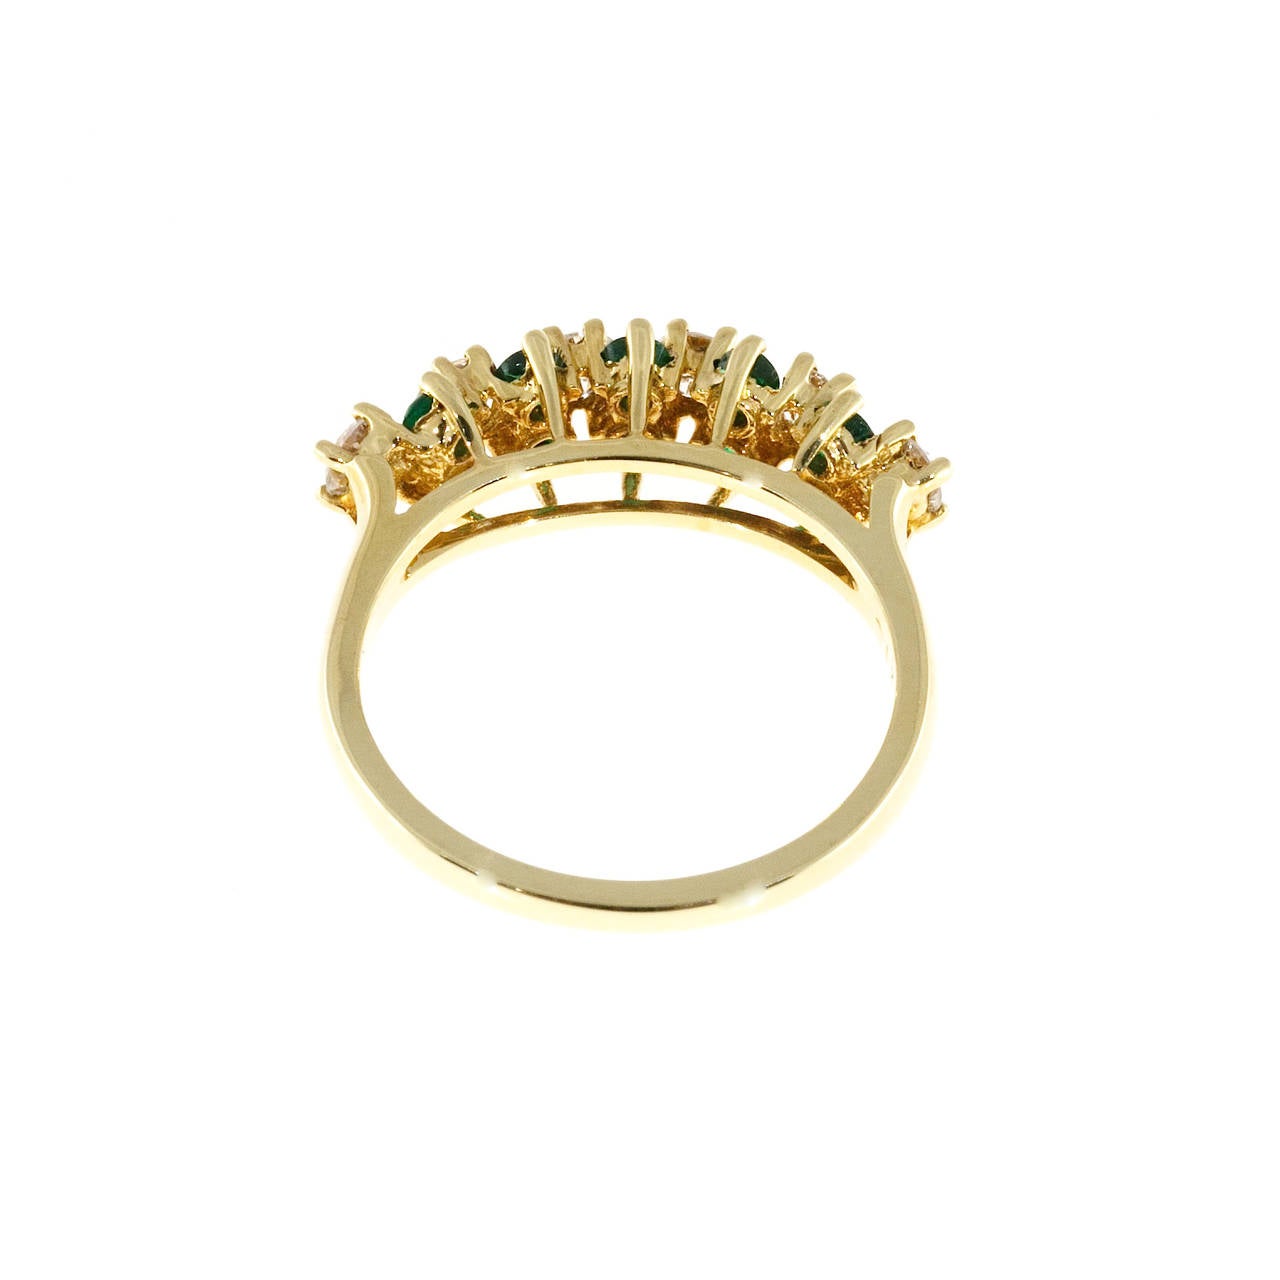 Designer KN handmade 18k yellow gold ring with Colombian gem Emeralds and fine white full cut diamonds.

10 gem Colombian Emeralds, approx. total weight .40cts
6 full cut F, VS diamonds, approx. total weight .50cts
18k Yellow Gold
Stamped: 750